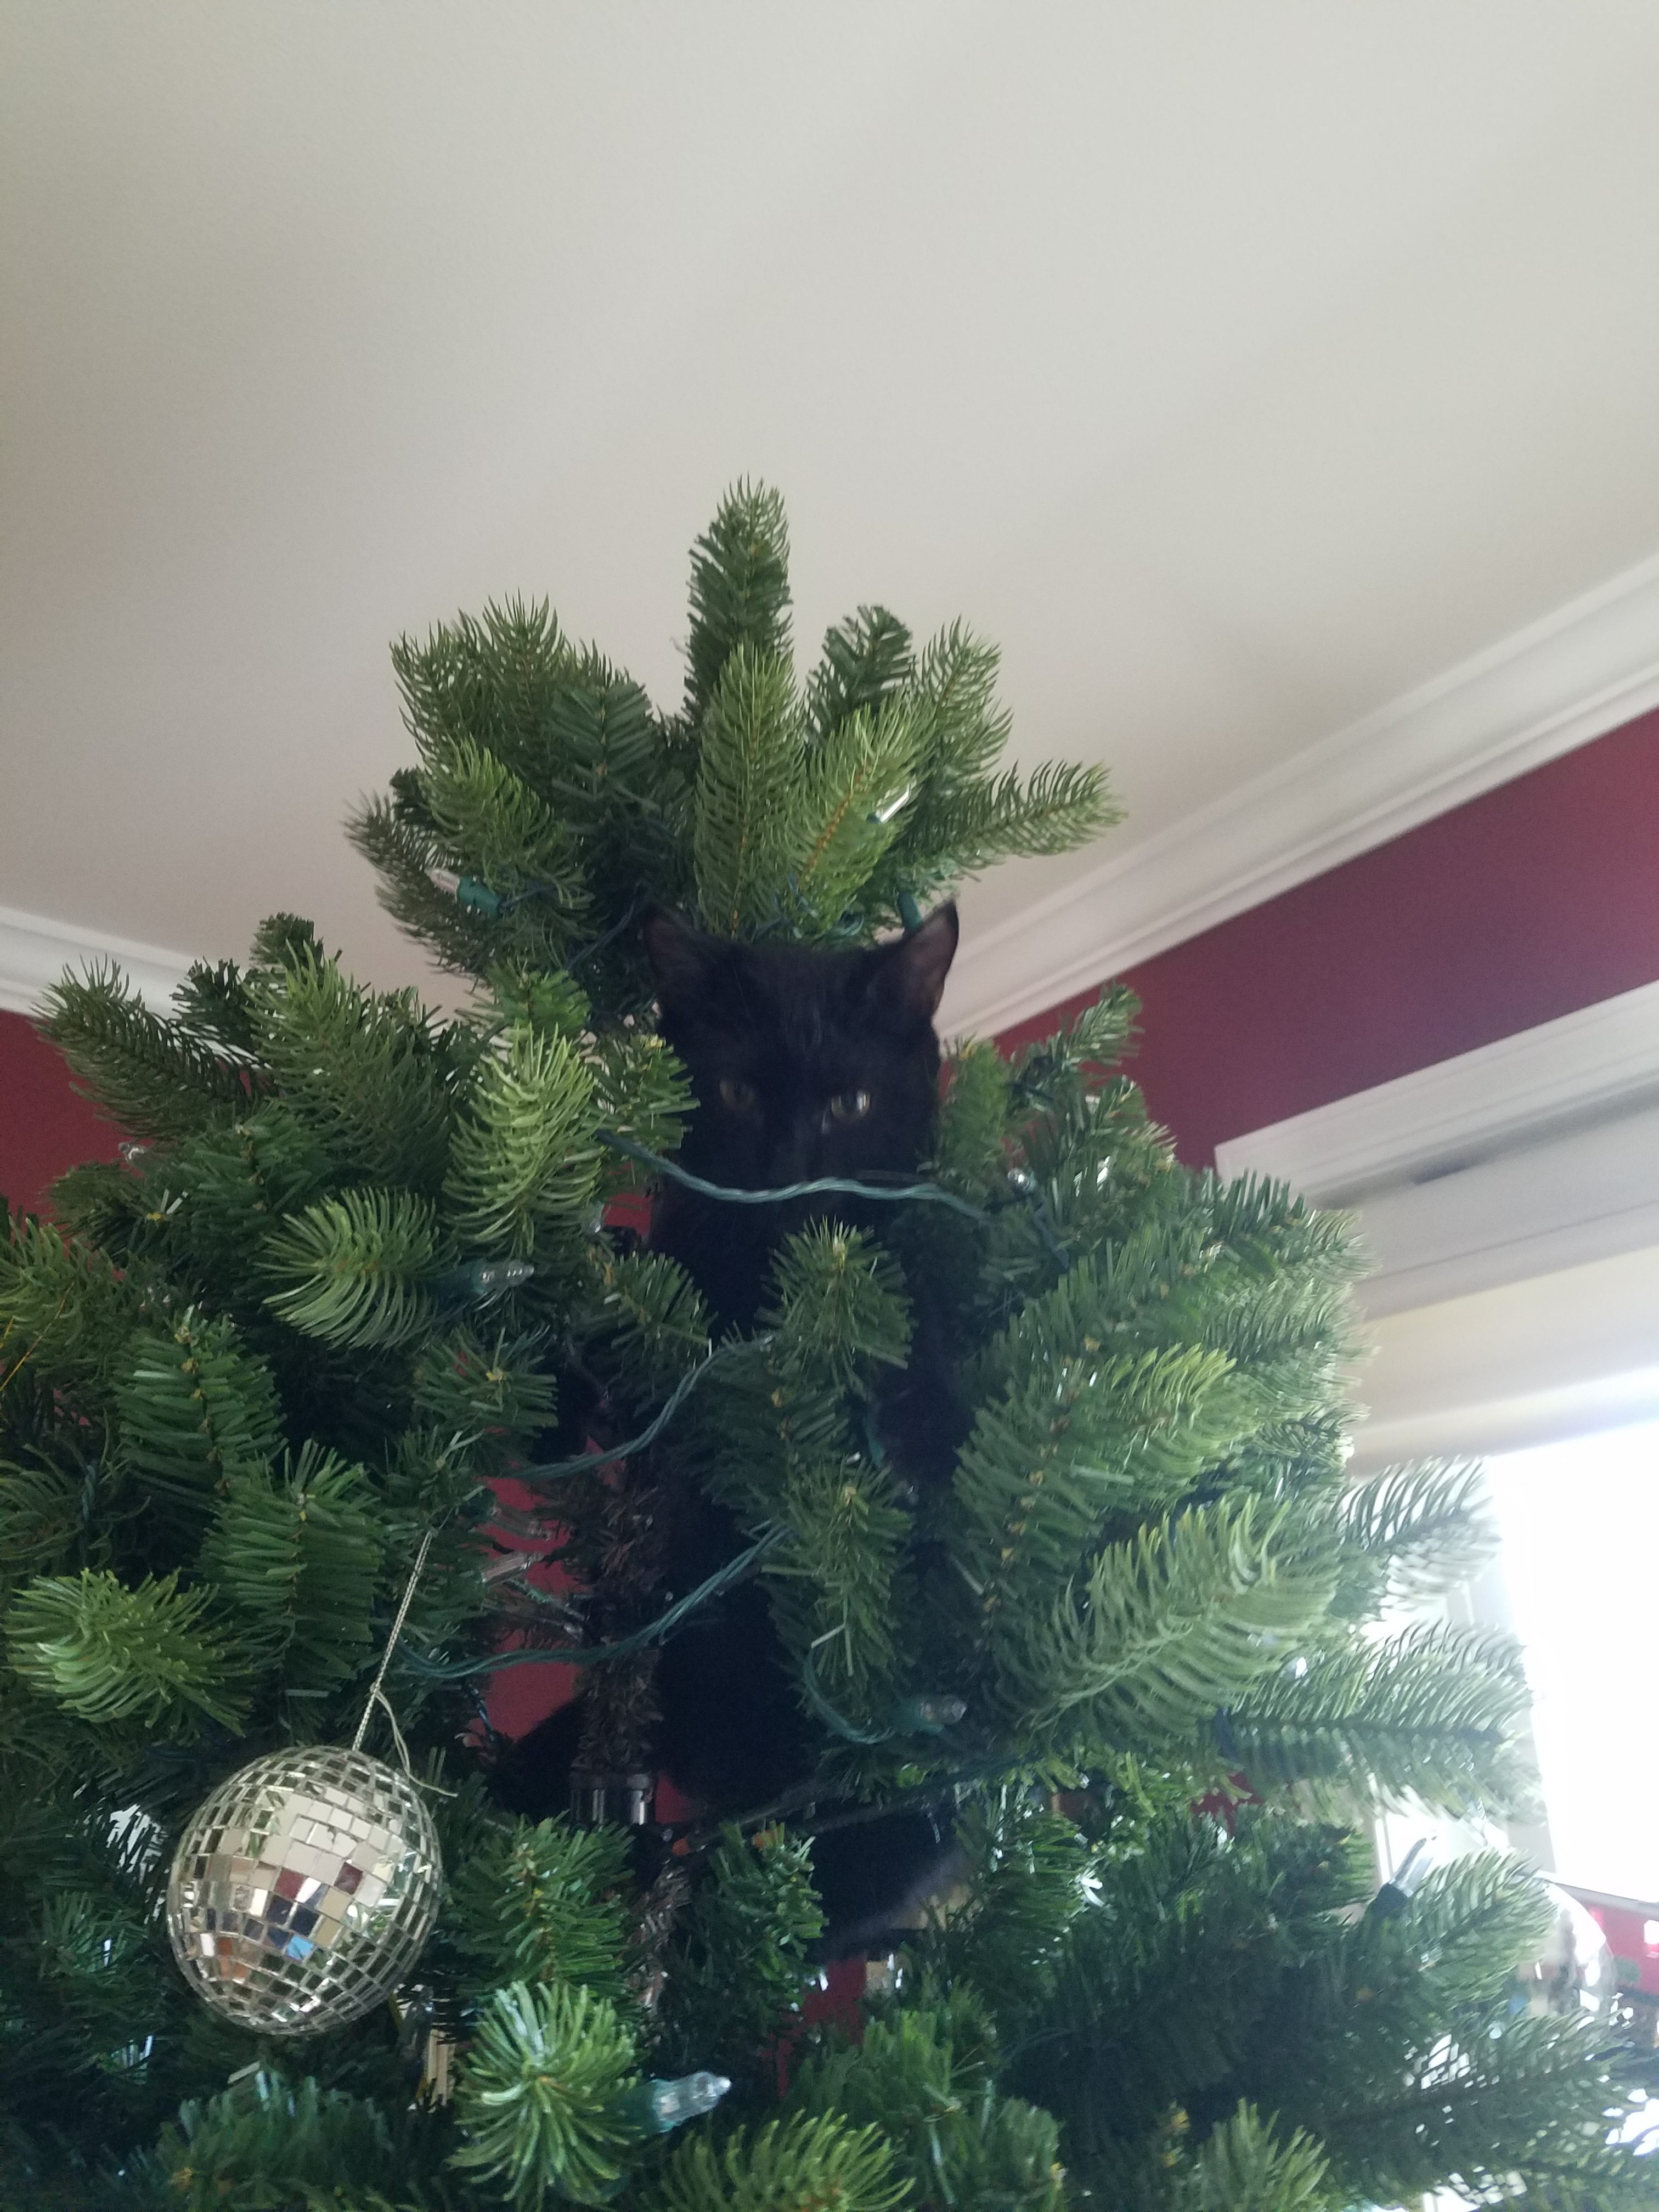 I'm not in the tree. You can't prove it. #fakenews